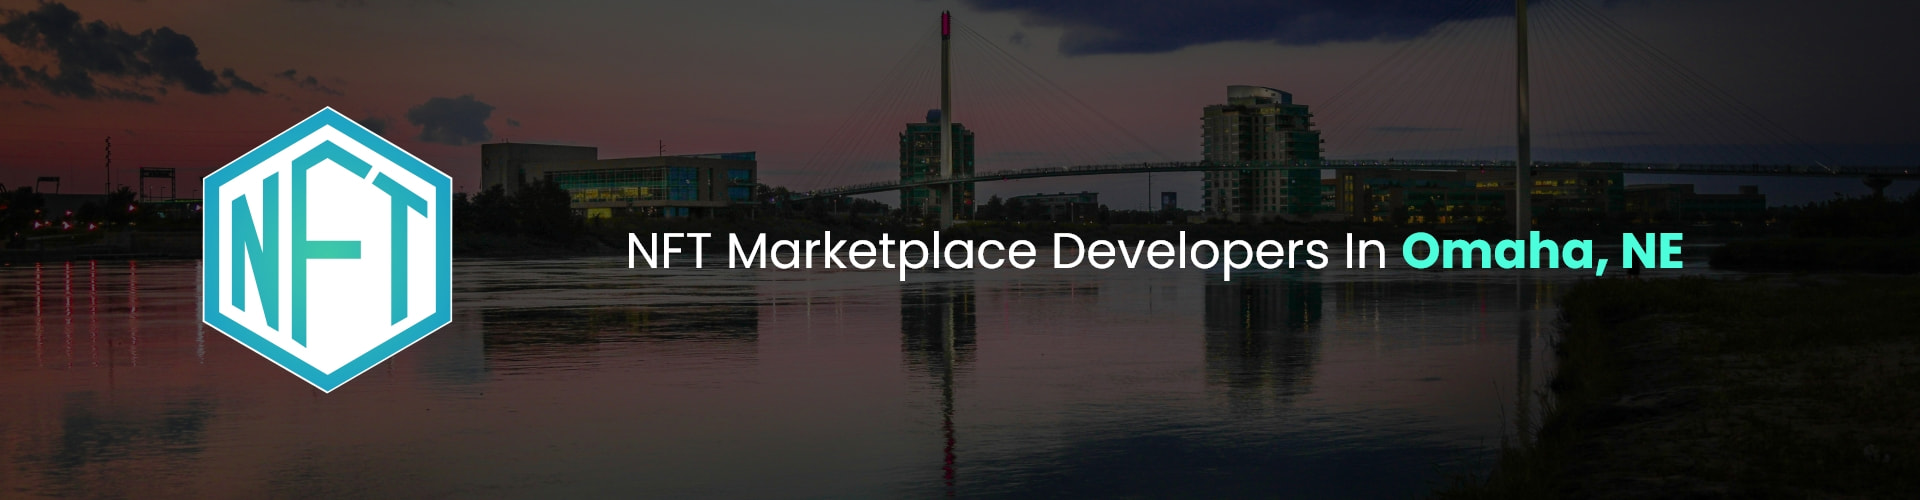 hire nft marketplace developers in omaha